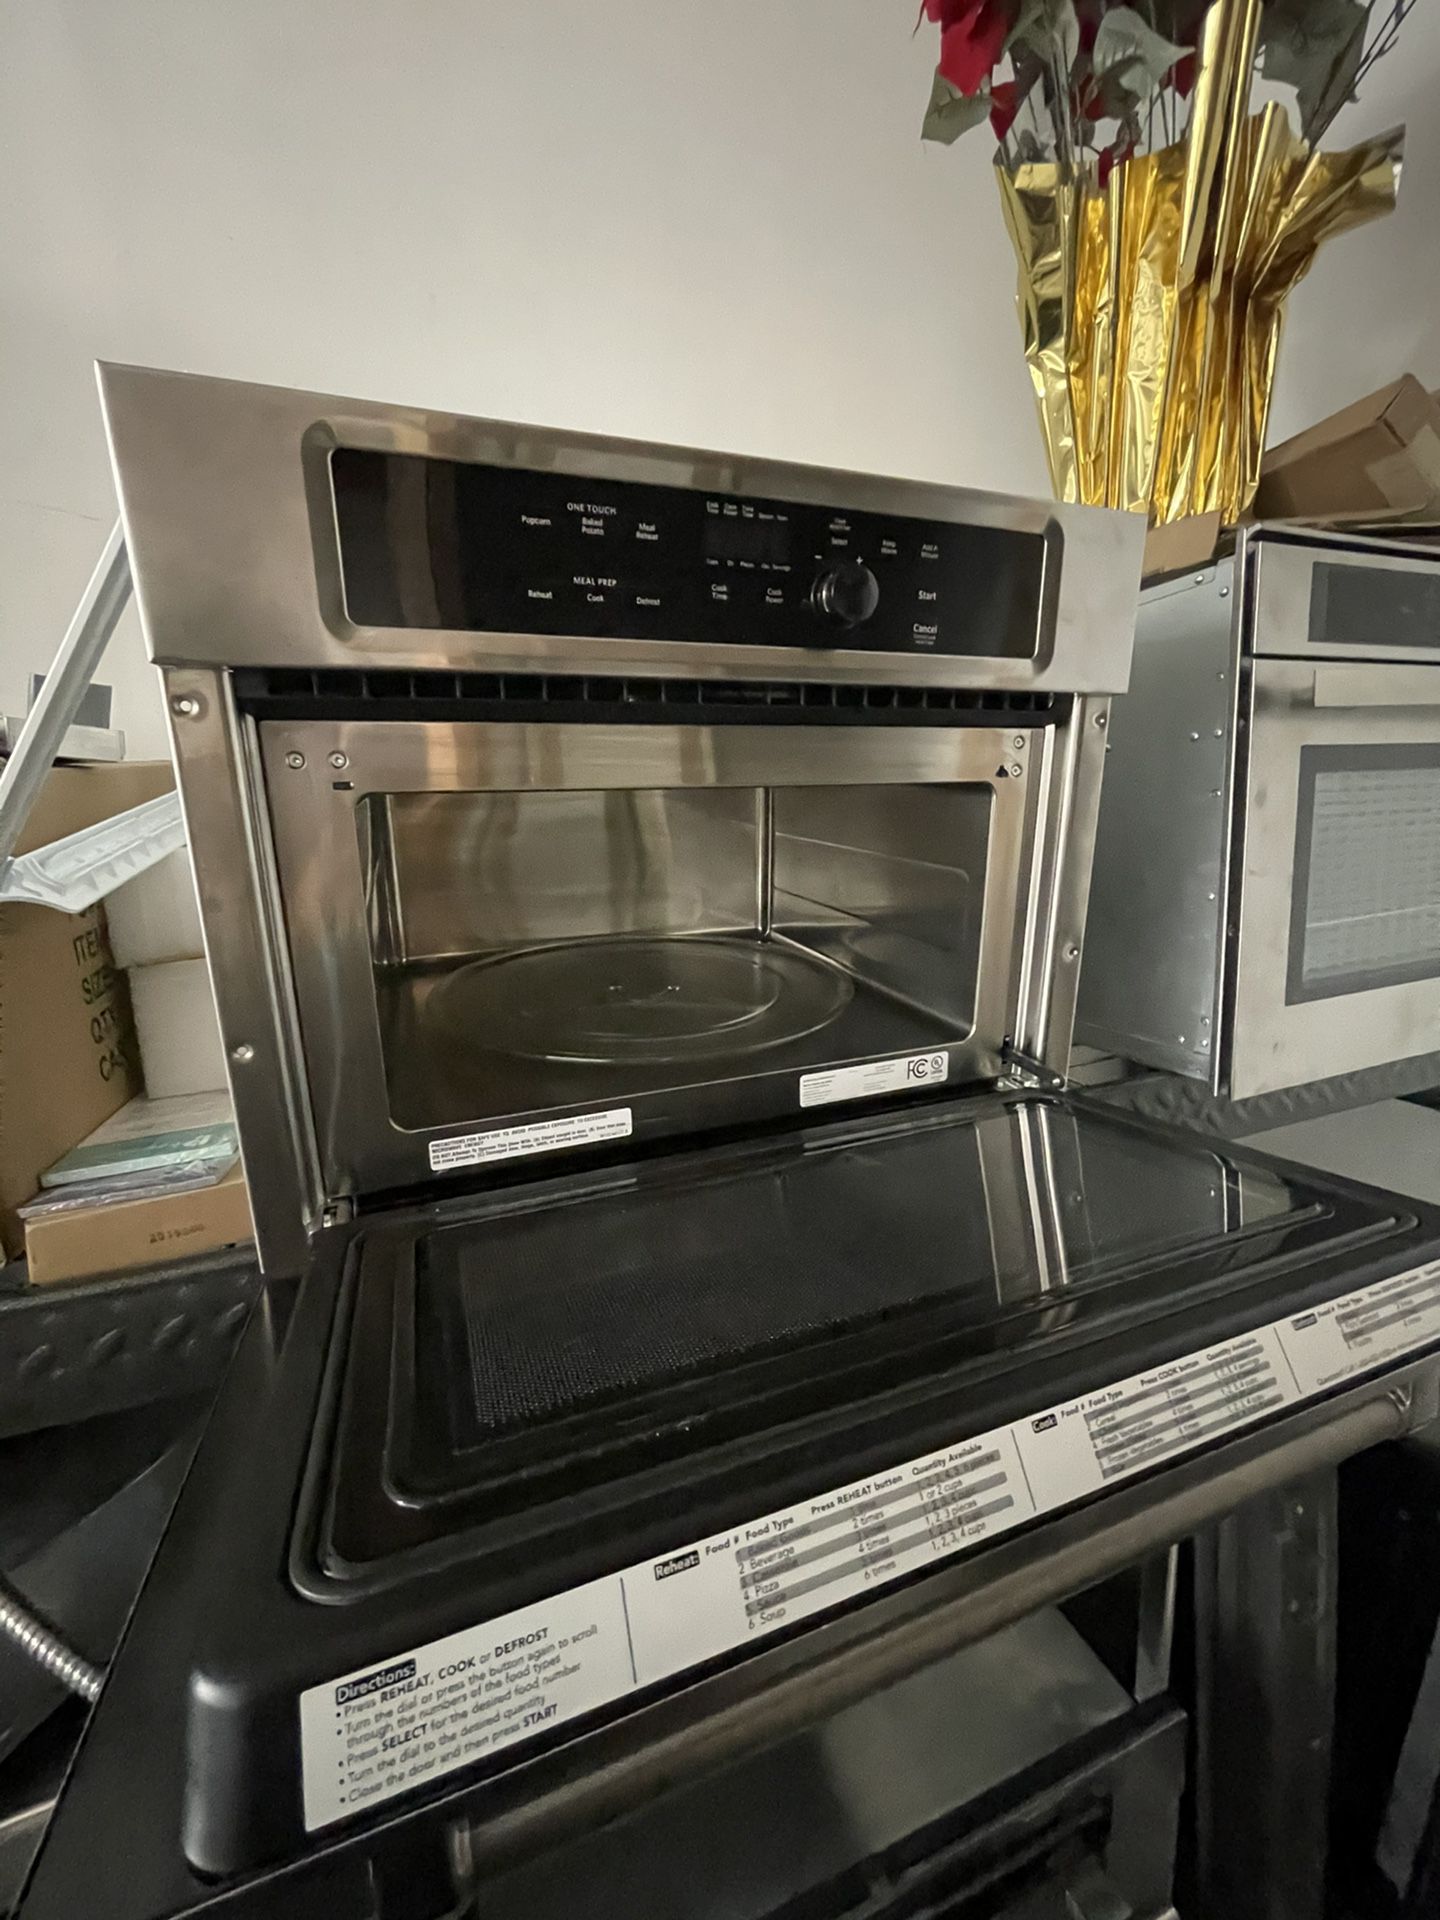 Kitchen Aid Built In Microwave 27”